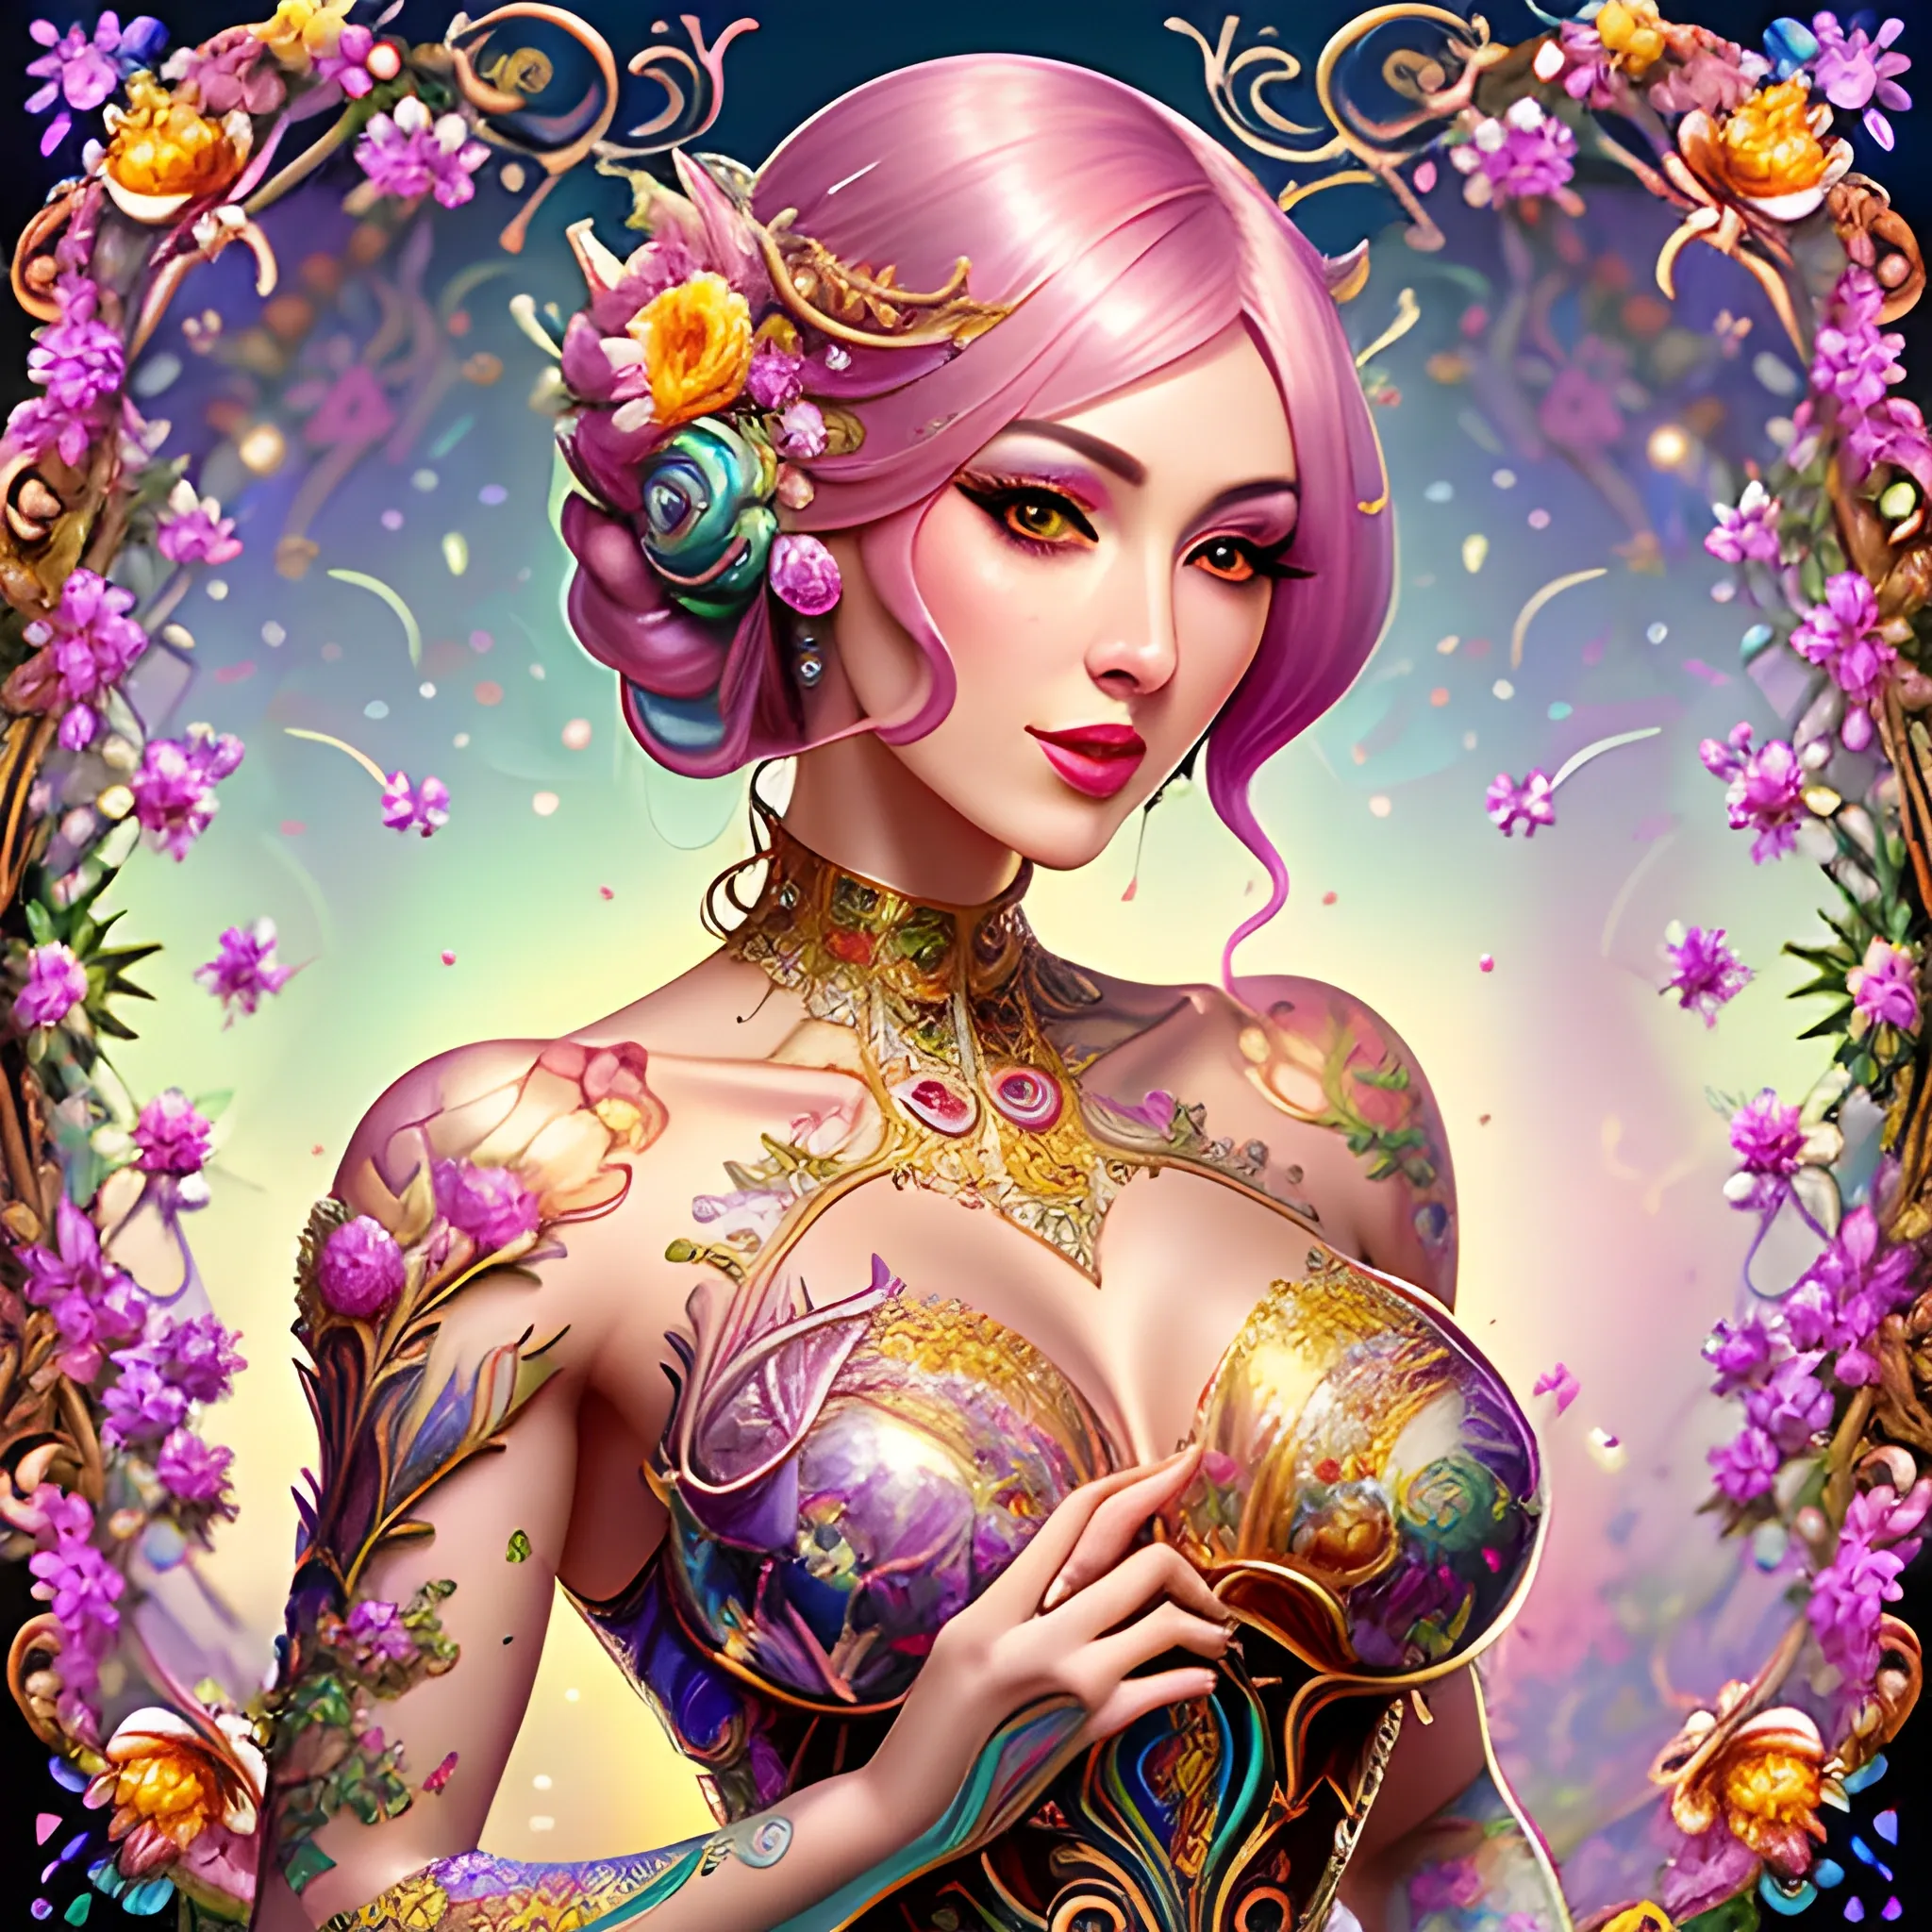 Cute colorful young girl with a posy of beautiful flowers - baby sequins, holographic filigree, Perfect, masterpiece, intricate, extremely detailed, cute, charming, cutie, flowers, fantasy, digital art, author Ross Tran, Lop-eared, Artgerm and James Jean, Brian Froude, Naimi Kanani, masterpiece of complex art, golden ratio, trend of complex art stations, high detail, ultra-high quality, Mysterious, Oil Painting